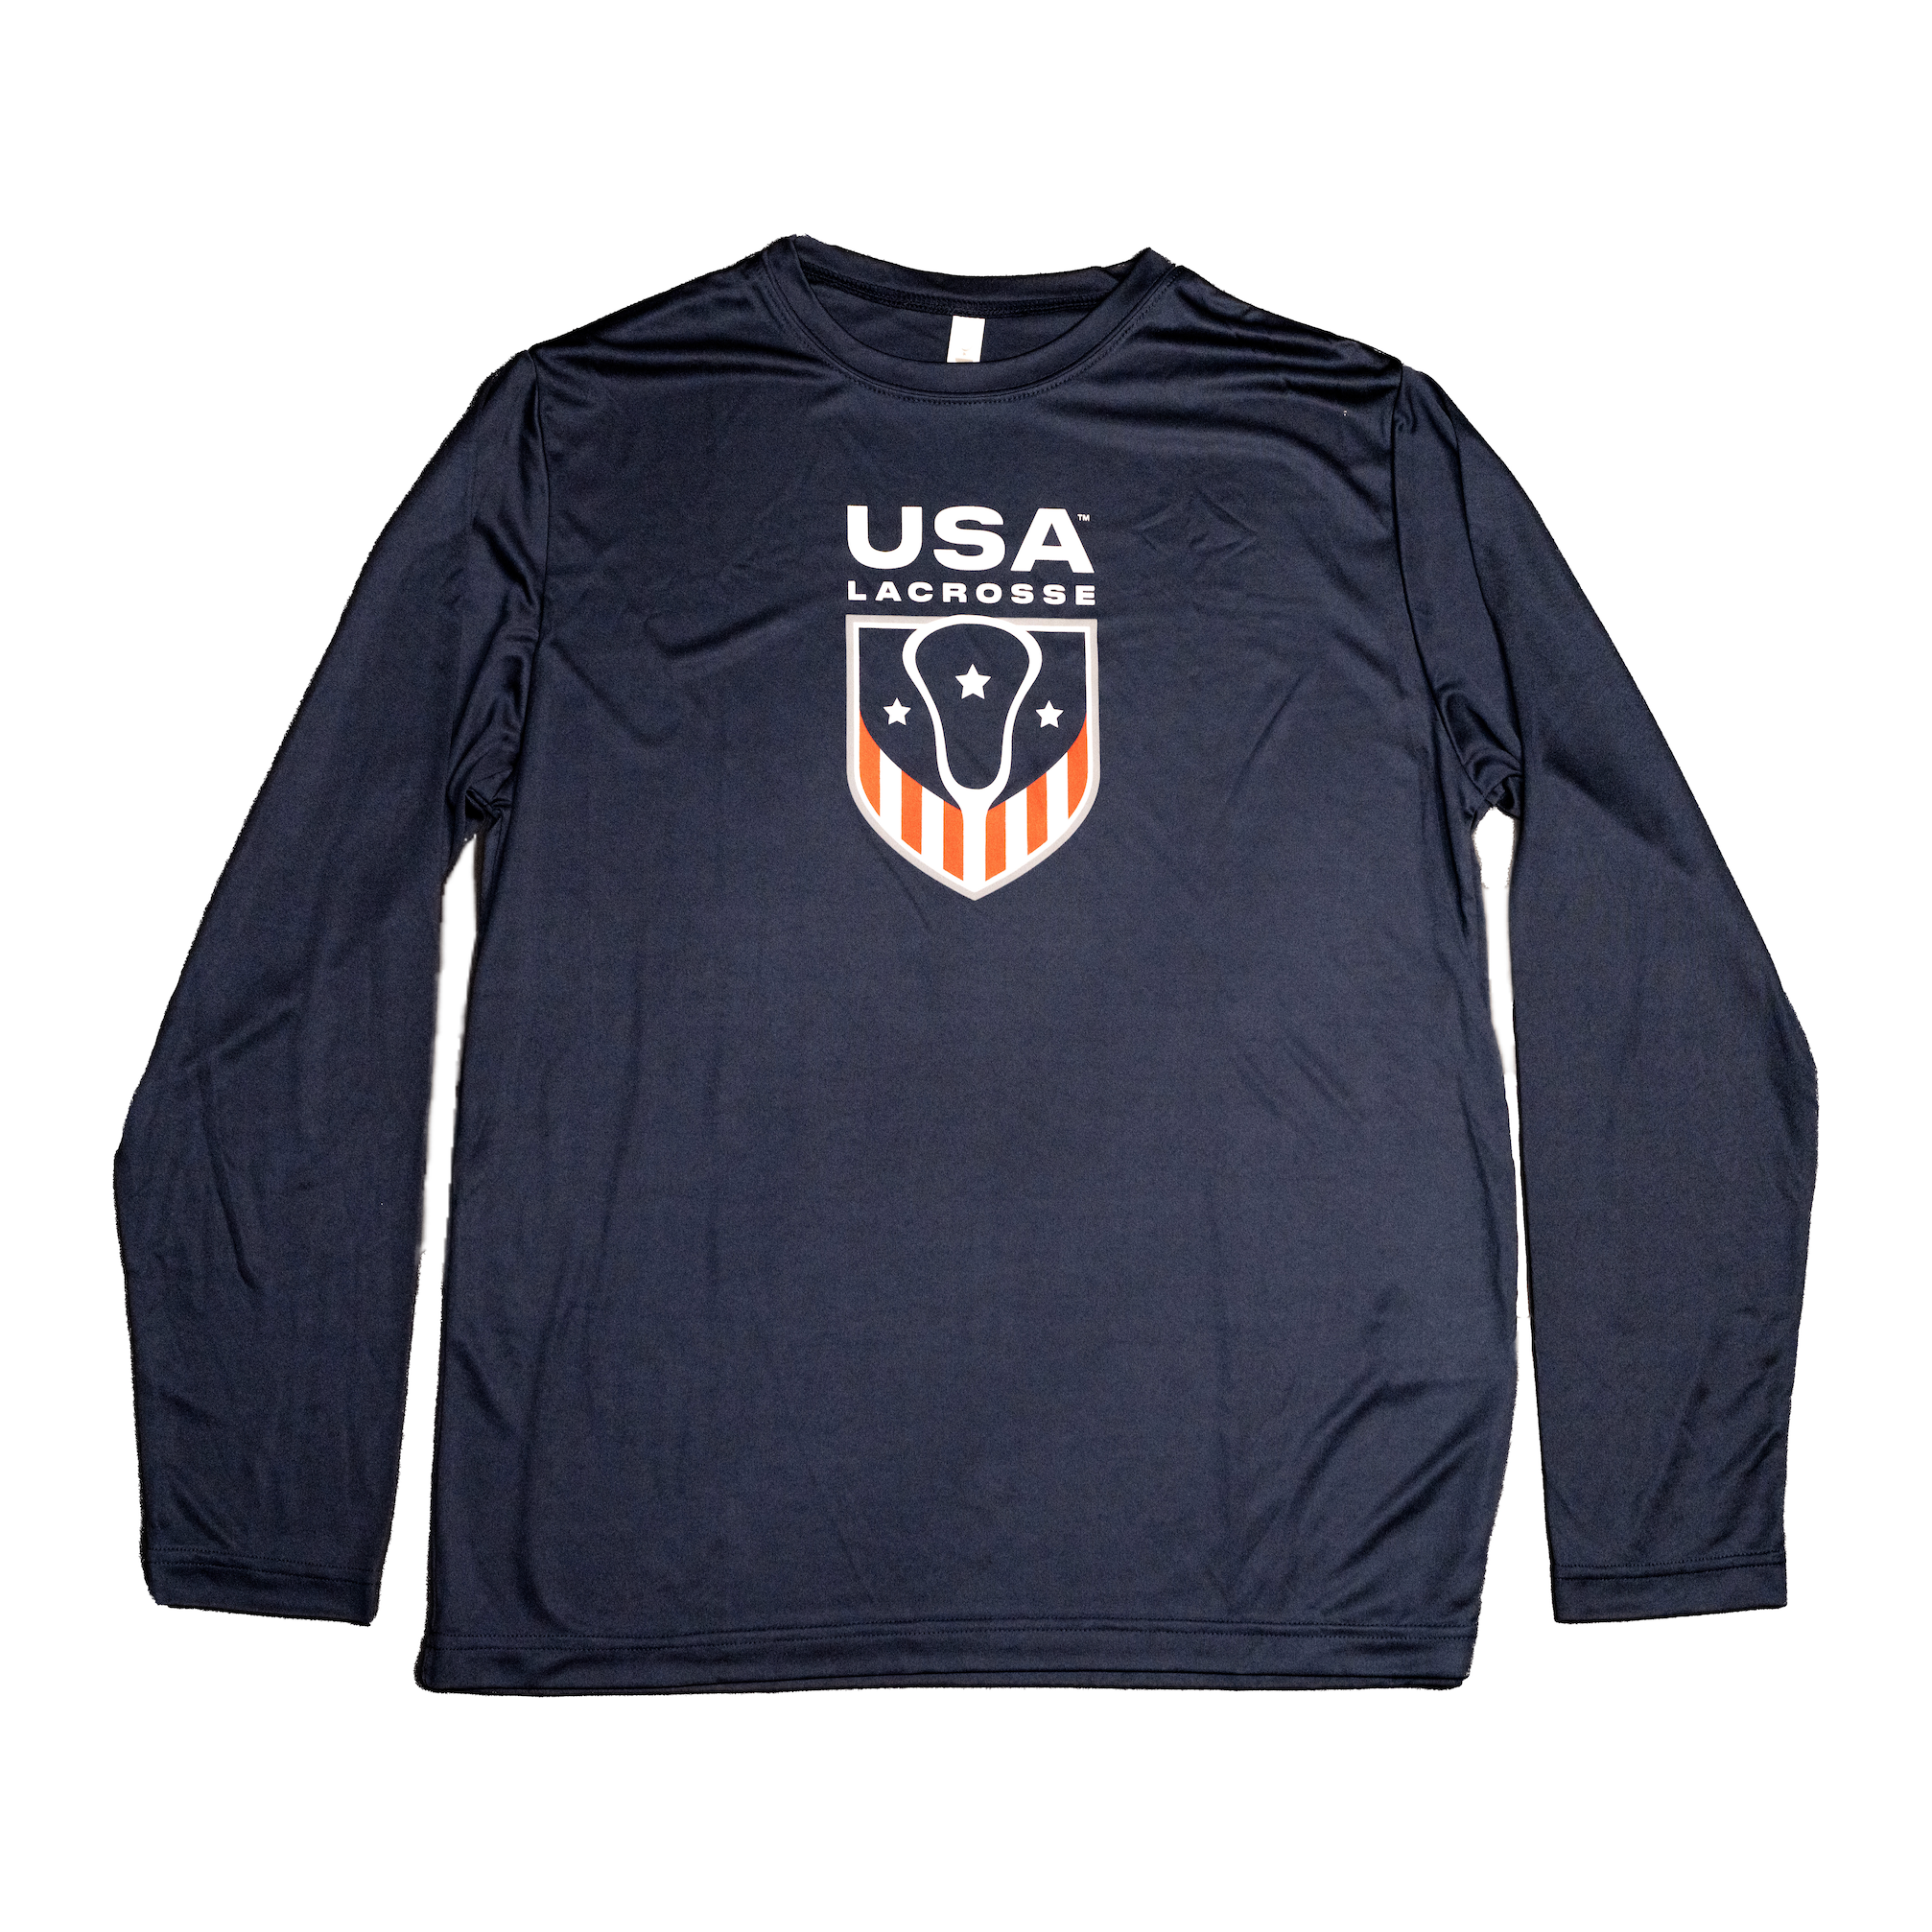 Adult's USA Lacrosse Cotton 365 Long Sleeve*